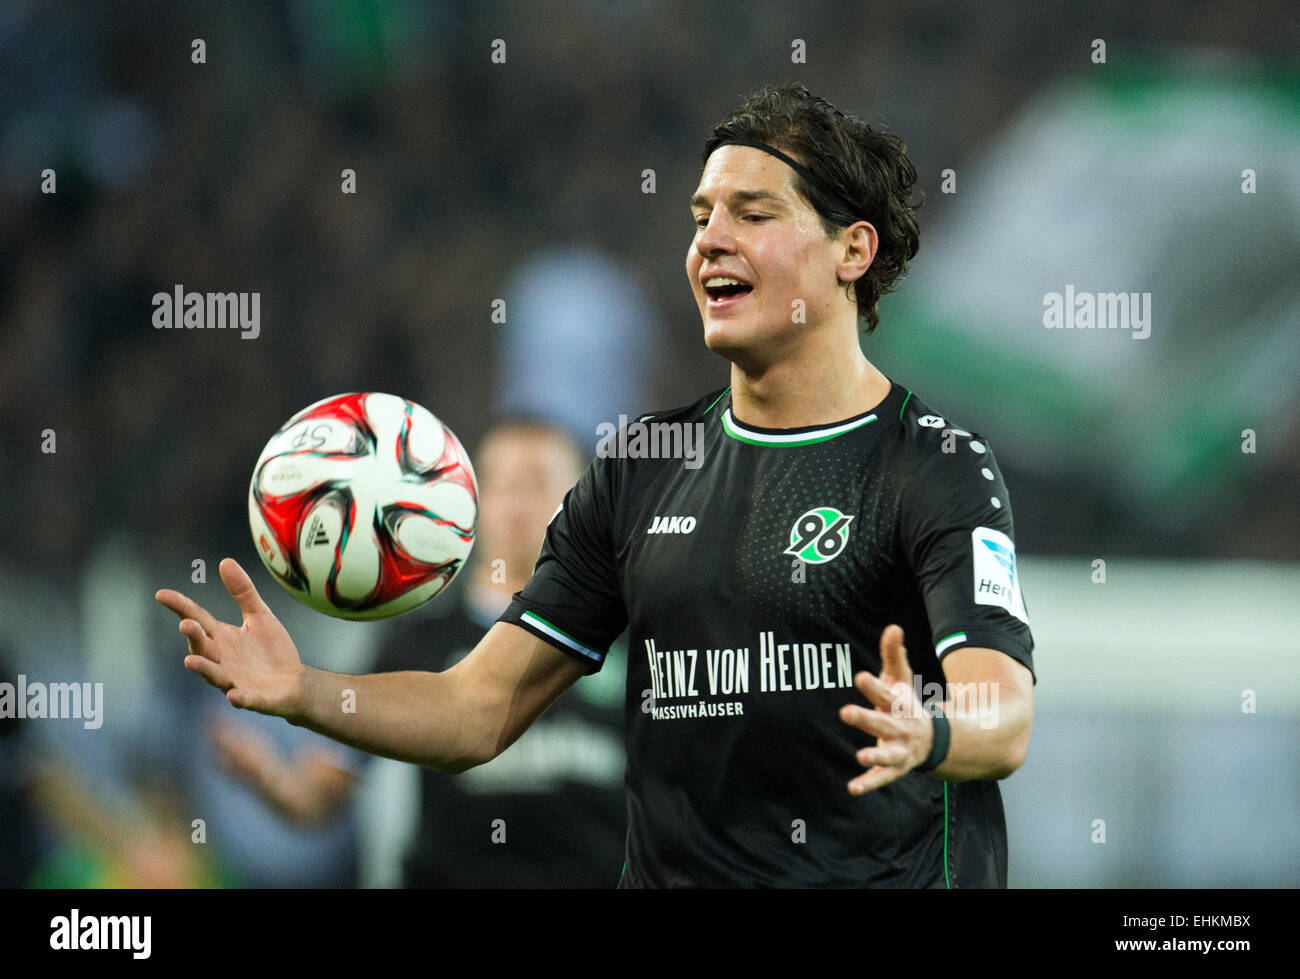 Moenchengladbach, Germany. 15th Mar, 2015. Hannover's Miiko Albornoz catchs the ball during the German Bundesliga soccer match between Borussia Moenchengladbach vs Hannover 96 in Moenchengladbach, Germany, 15 March 2015. (EMBARGO CONDITIONS - ATTENTION - Due to the accreditation guidelines, the DFL only permits the publication and utilisation of up to 15 pictures per match on the internet and in online media during the match) Photo: BERND THISSEN/dpa/Alamy Live News Stock Photo